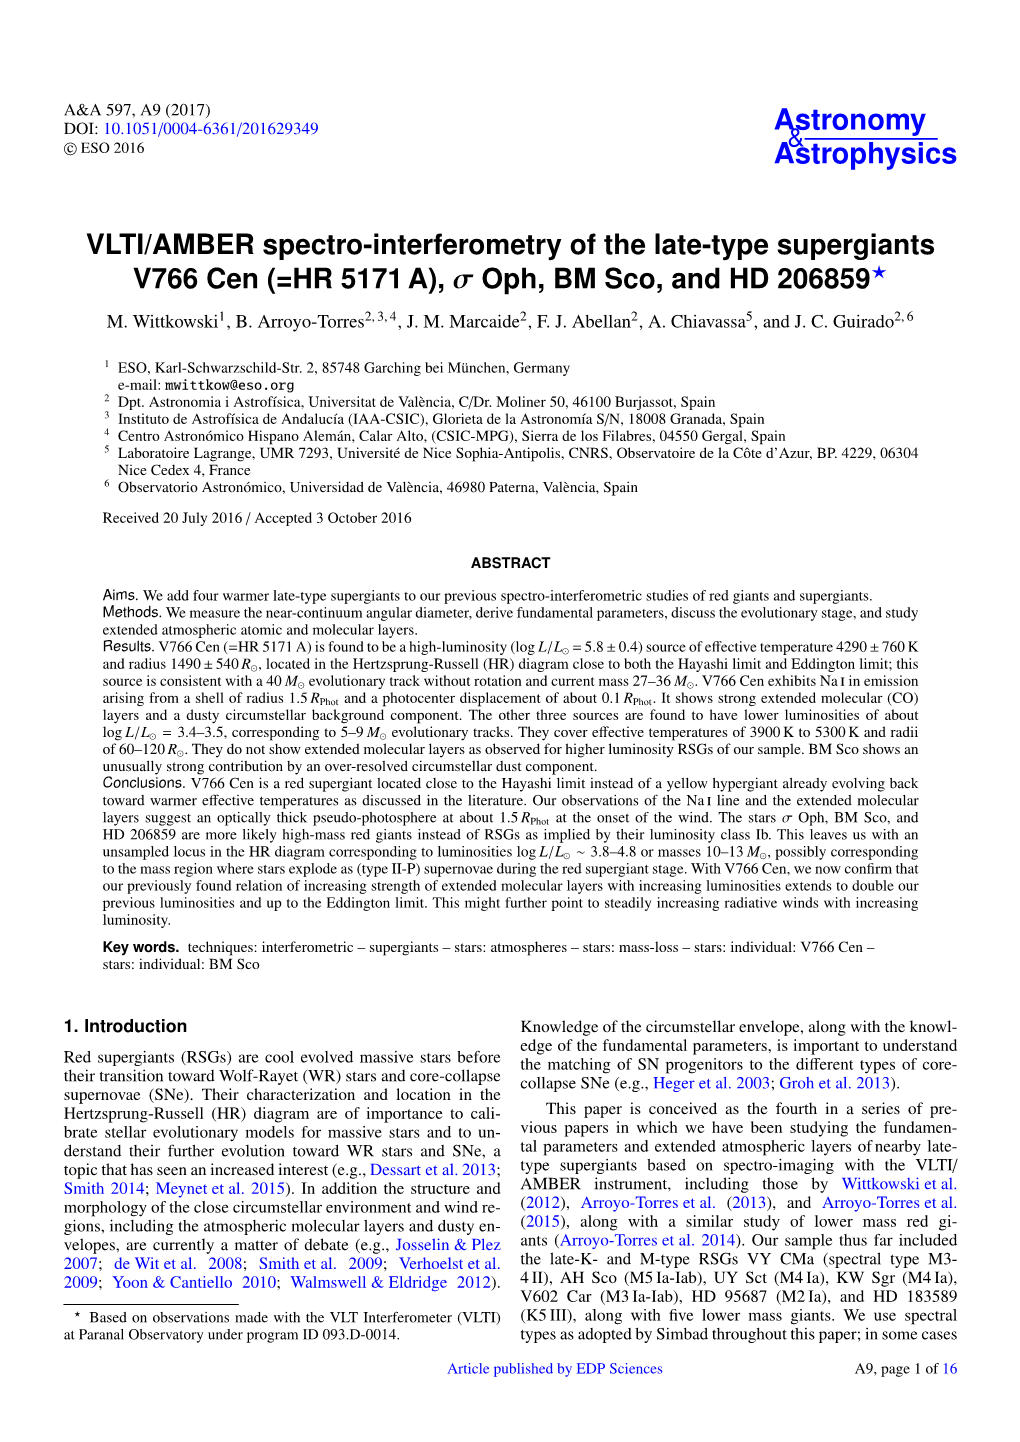 VLTI/AMBER Spectro-Interferometry of the Late-Type Supergiants V766 Cen (=HR 5171 A), Σ Oph, BM Sco, and HD 206859? M